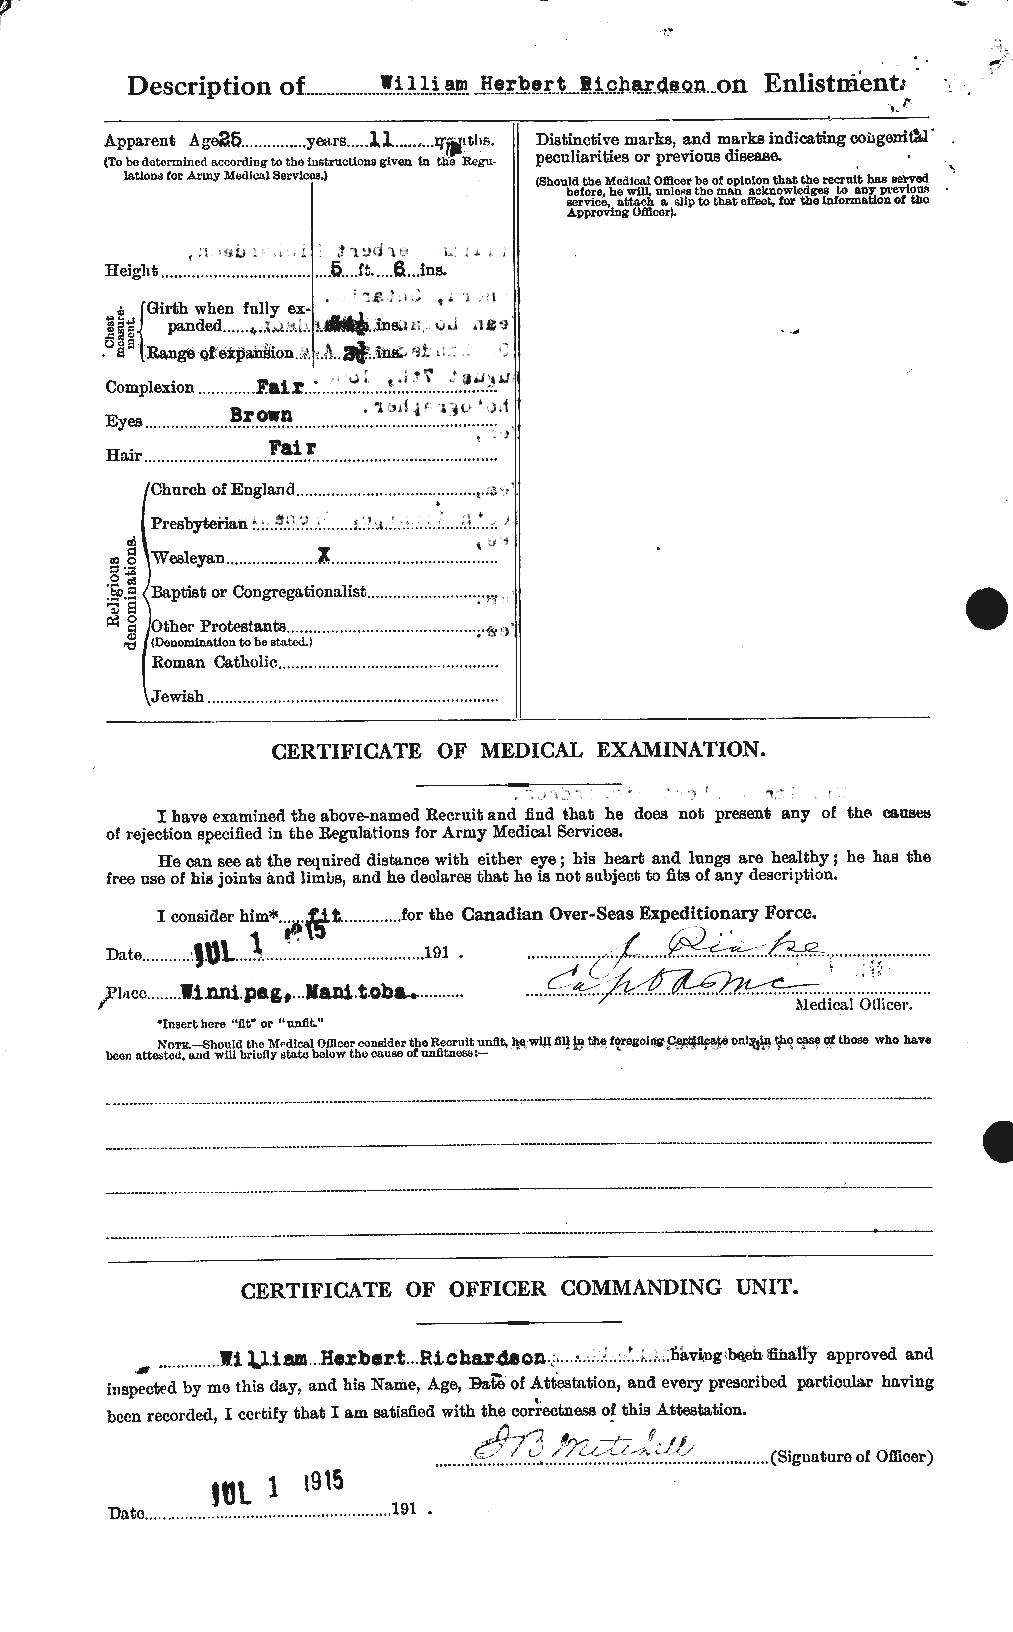 Personnel Records of the First World War - CEF 608581b